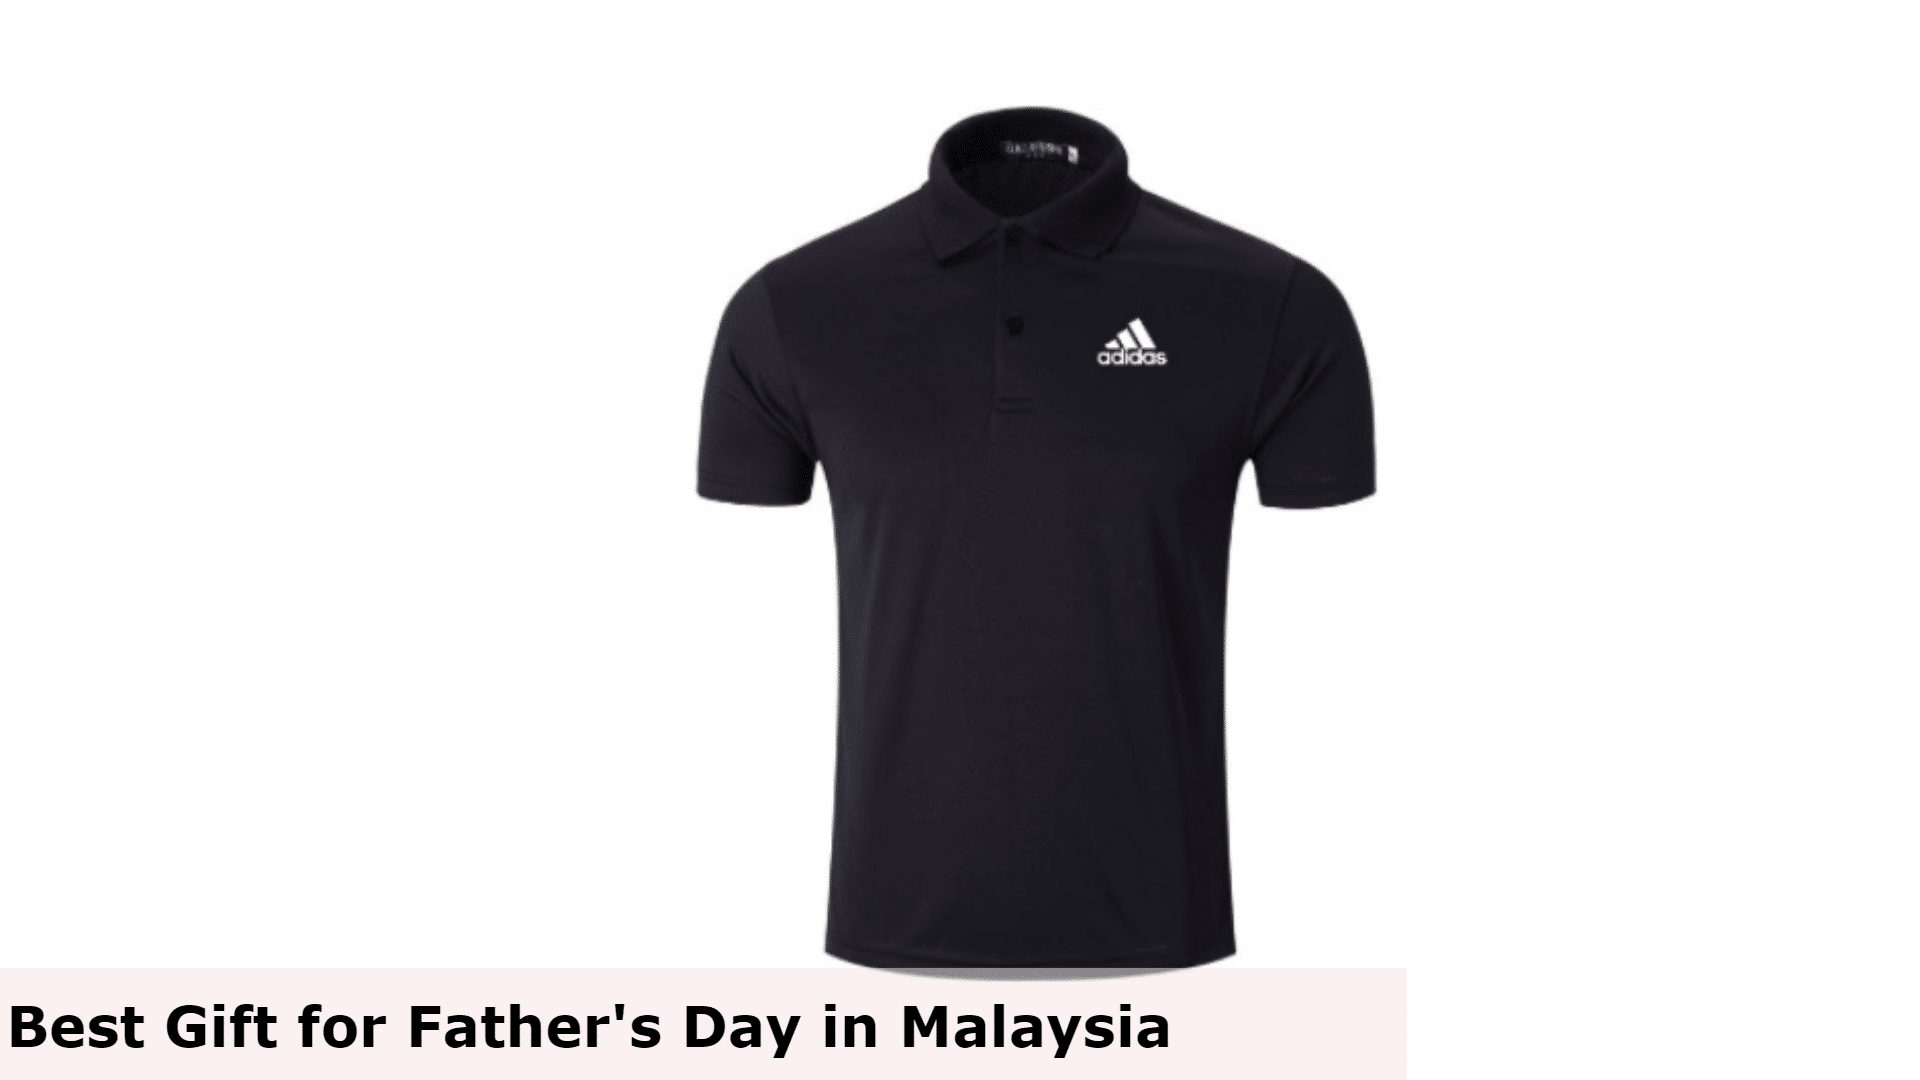 Collared T-shirt - Best Gift for Father's Day in Malaysia, Best gift for Father's Day Malaysia, Best Father's Day Gifts for Dad, What do dads want for Father's Day in Malaysia?, What is a good cheap gift for Father's Day in Malaysia?, Do you give gifts on Father's Day in Malaysia?, gifts for dad who wants nothing, simple father's day gift ideas, father's day gift ideas 2022, father's day gift ideas during covid, father's day gift ideas from daughter, unique gifts for dad, father's day gift ideas from wife, fathers day gifts from son, What buy for a dad that doesn't want anything?, What to get a dad that is hard to buy for?, What should I get my boring dad for Christmas?, What gifts do dads like?,